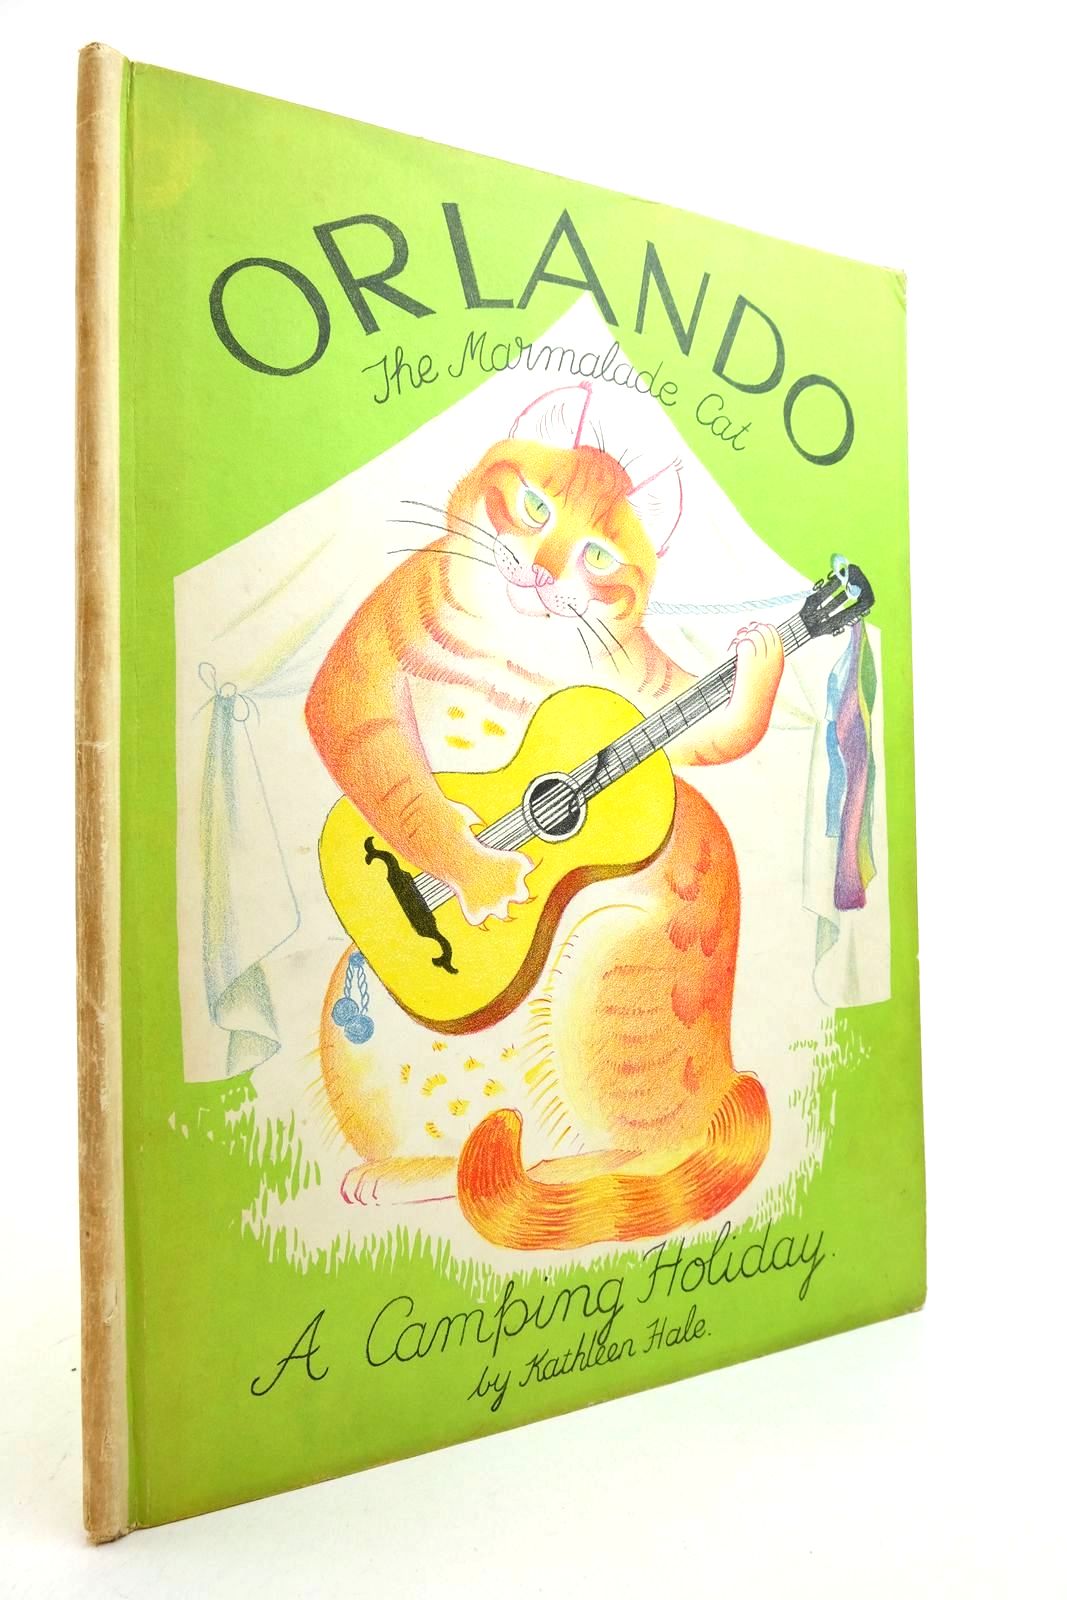 Photo of ORLANDO (THE MARMALADE CAT) A CAMPING HOLIDAY written by Hale, Kathleen illustrated by Hale, Kathleen published by Country Life (STOCK CODE: 2140228)  for sale by Stella & Rose's Books